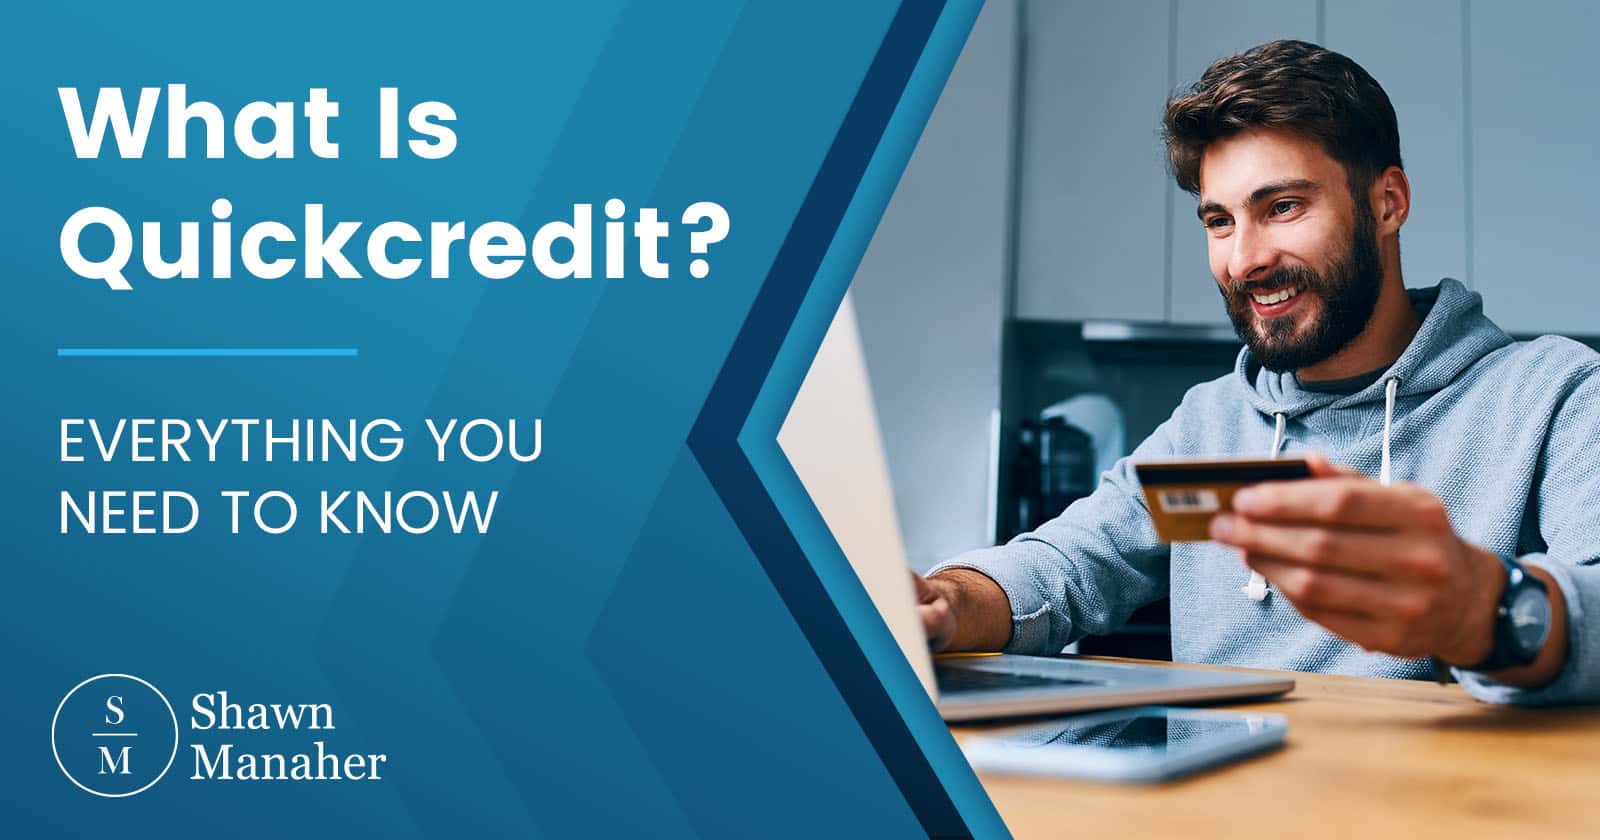 What Is Quickcredit? [EVERYTHING YOU NEED TO KNOW]